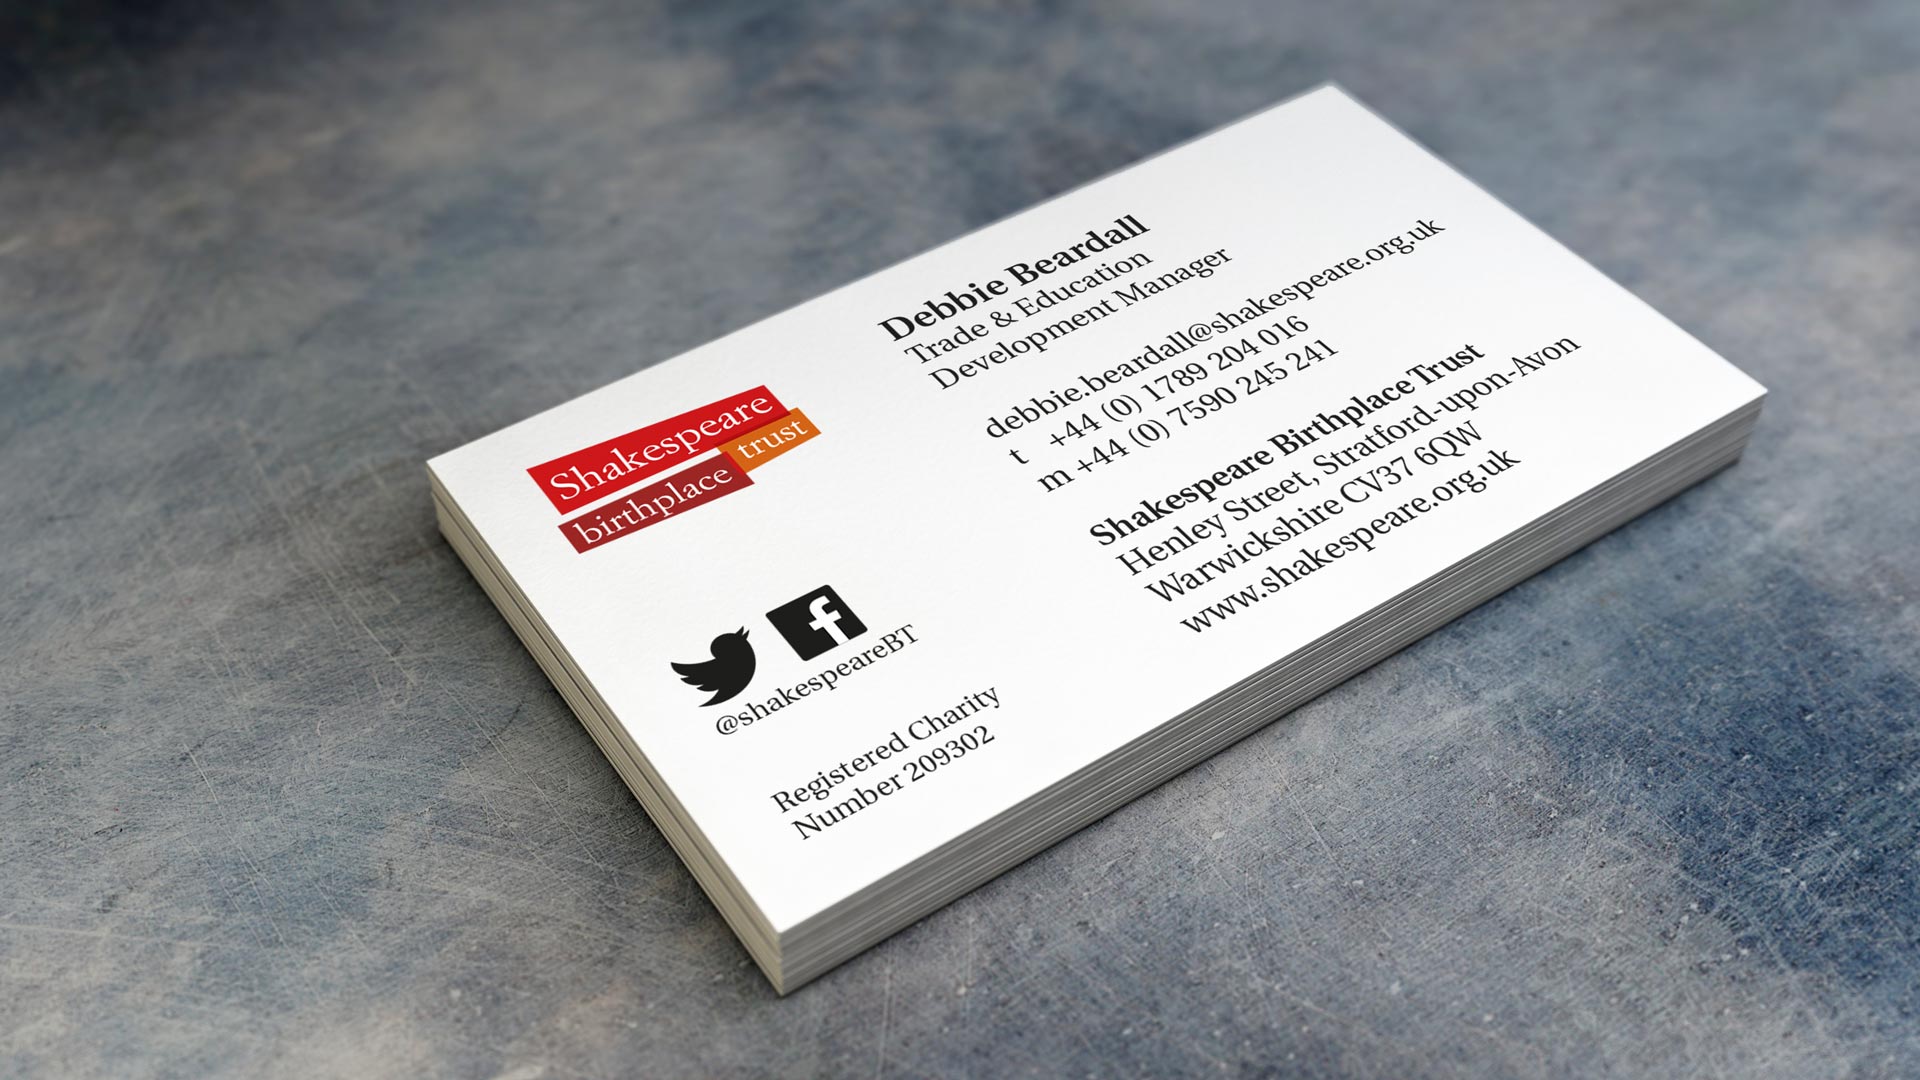 Shakespeare Birthplace Trust business card